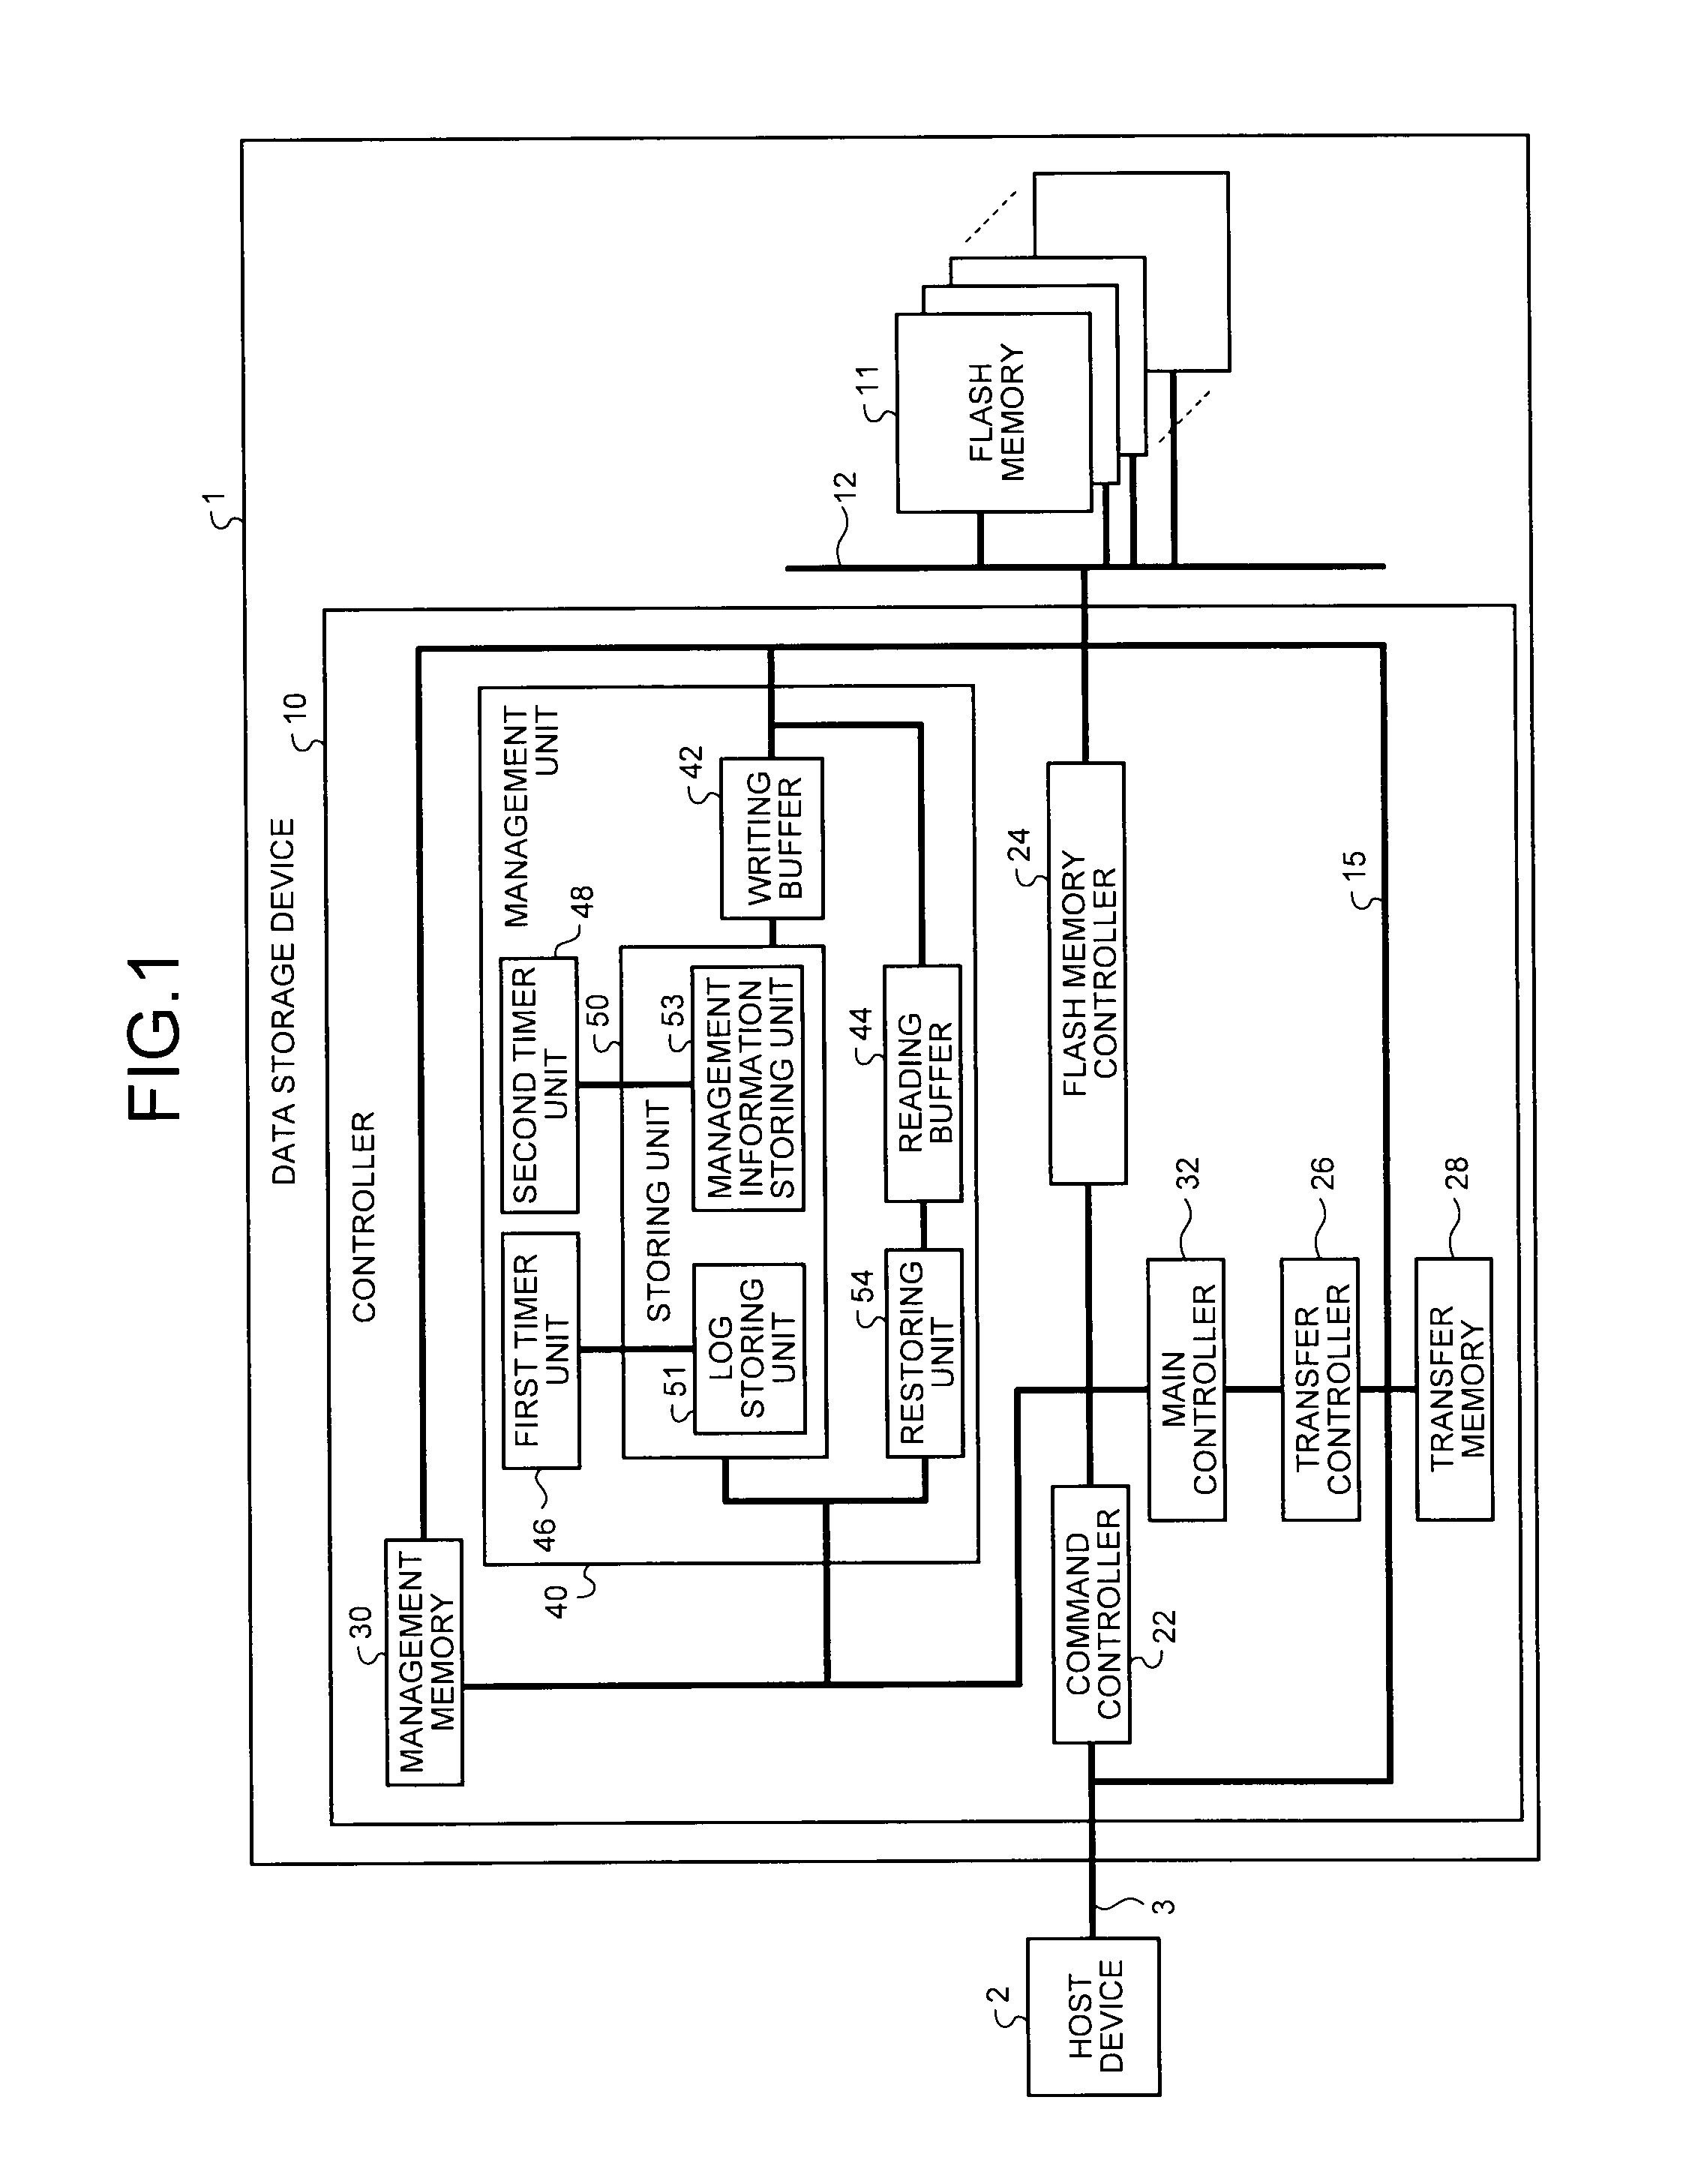 Controller and data storage device